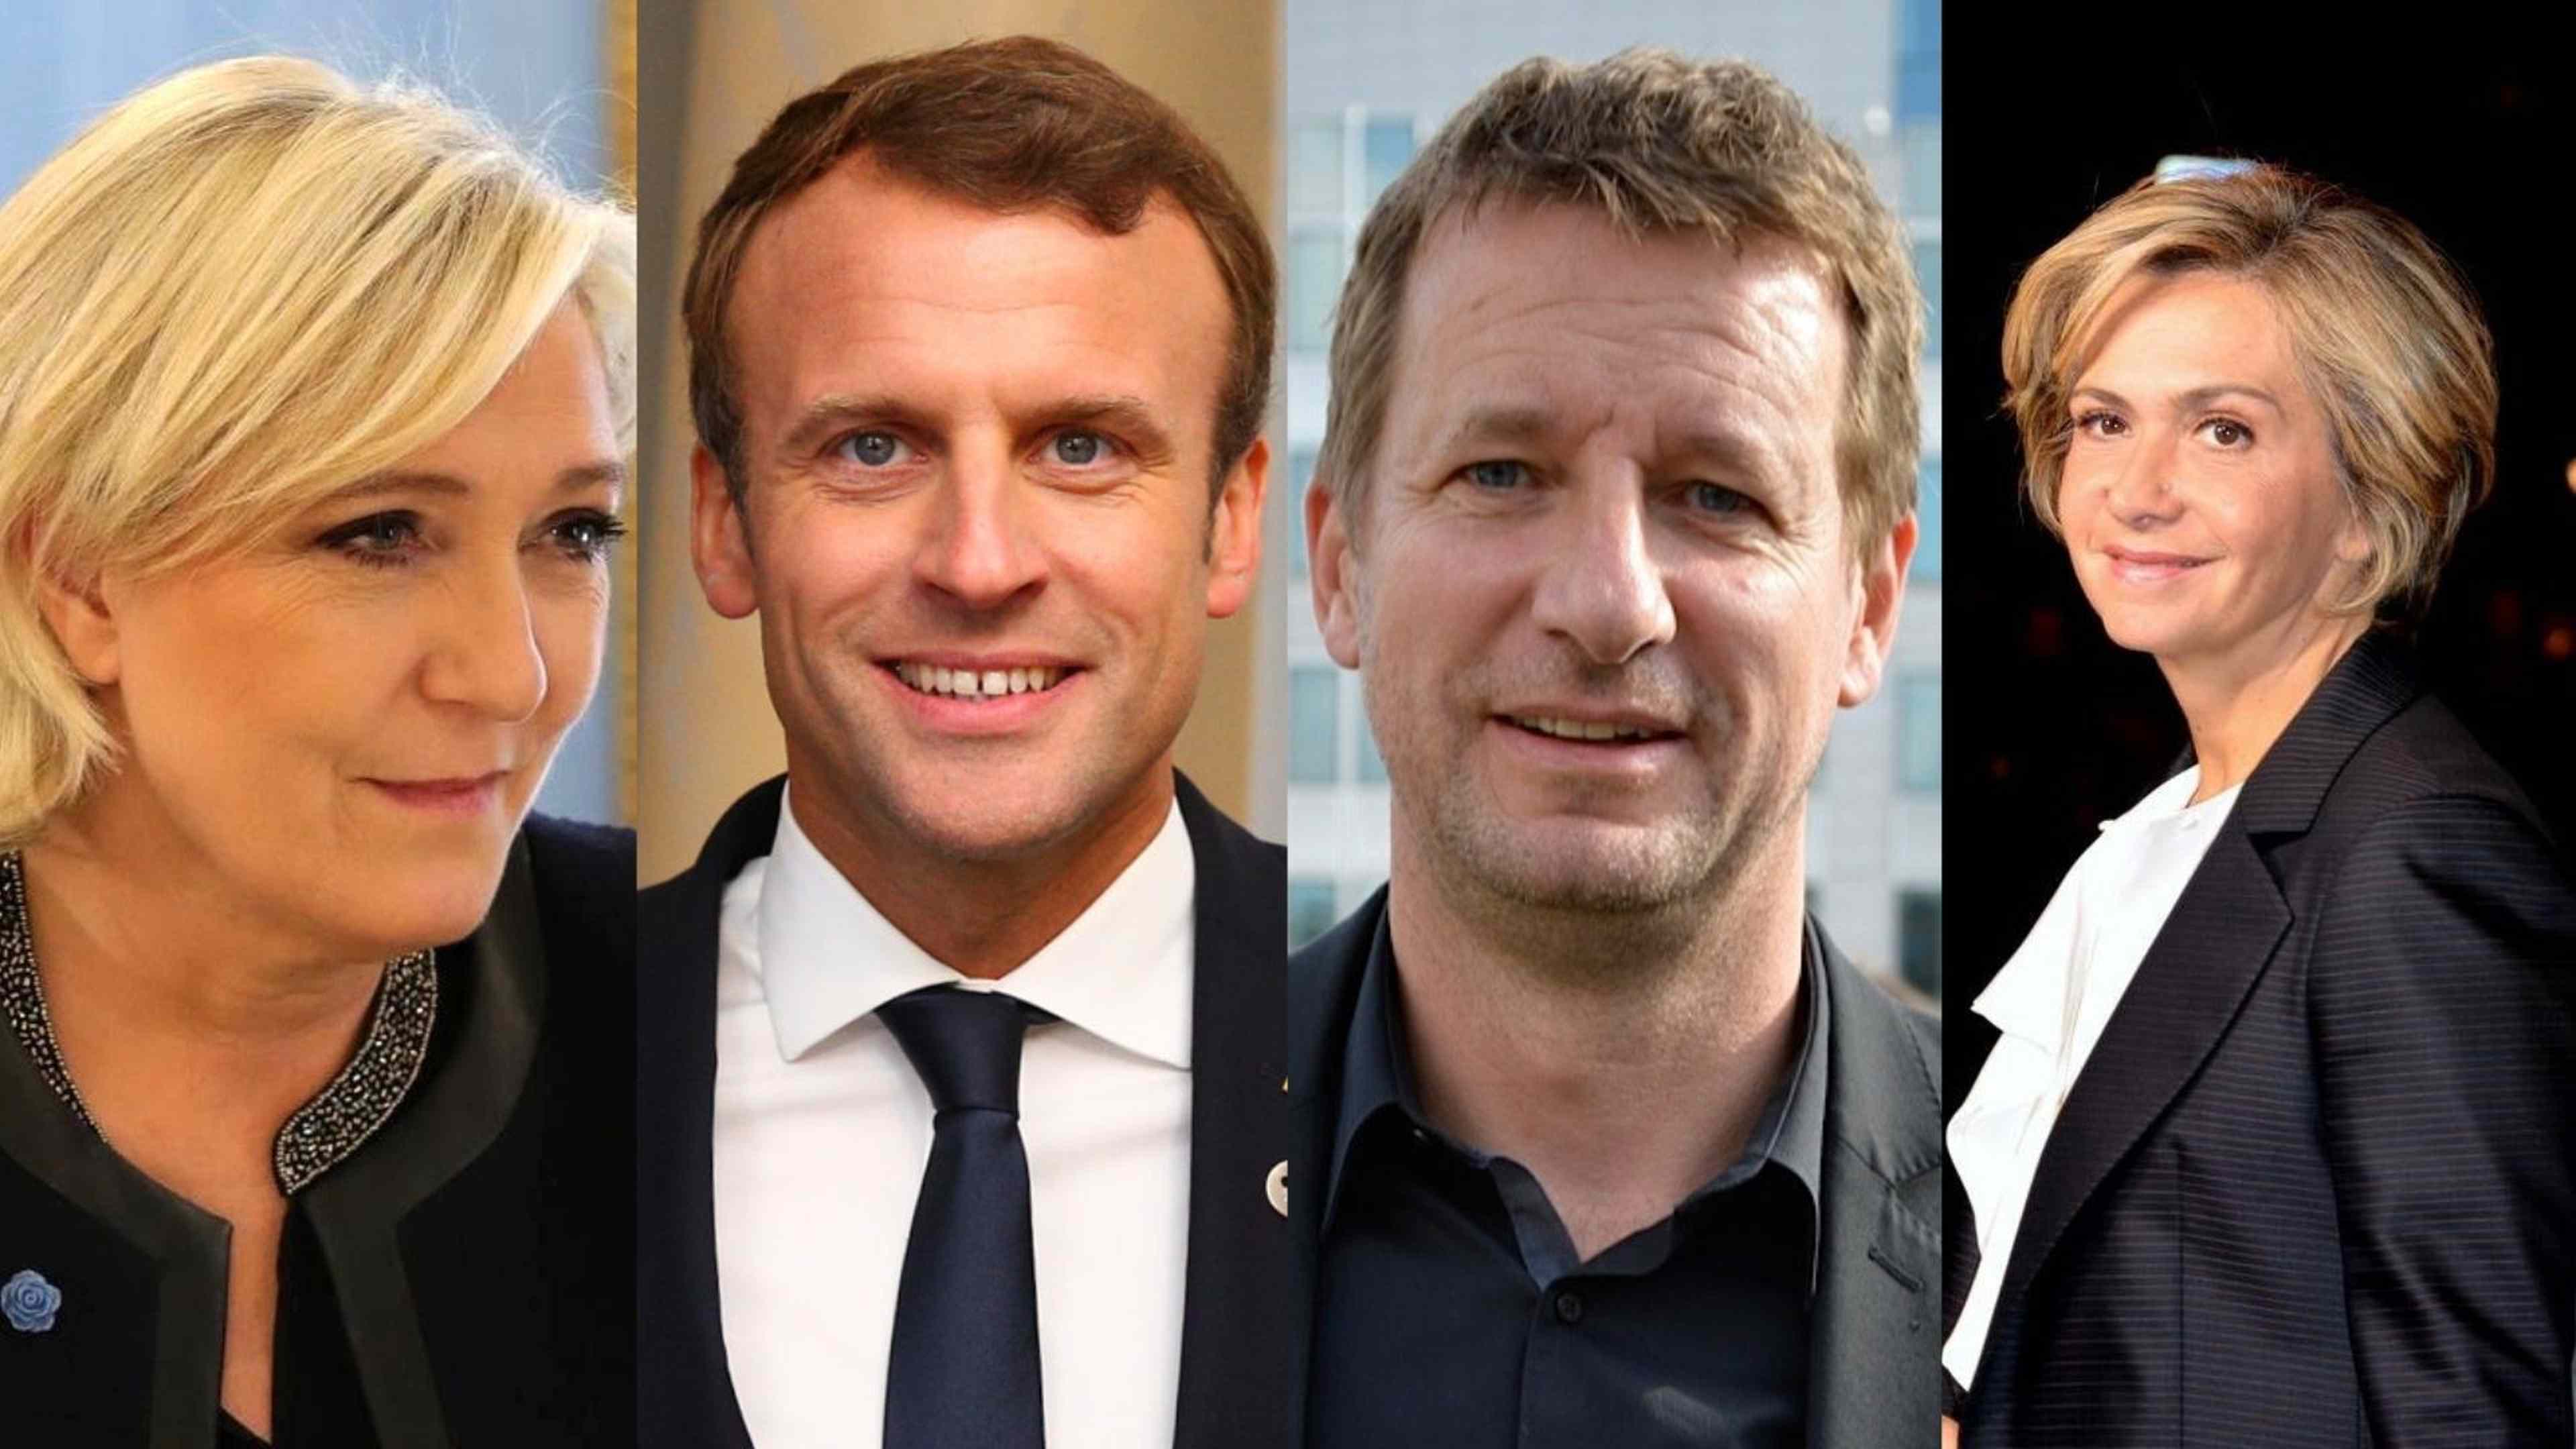 /2022/03/elections-presidentielle